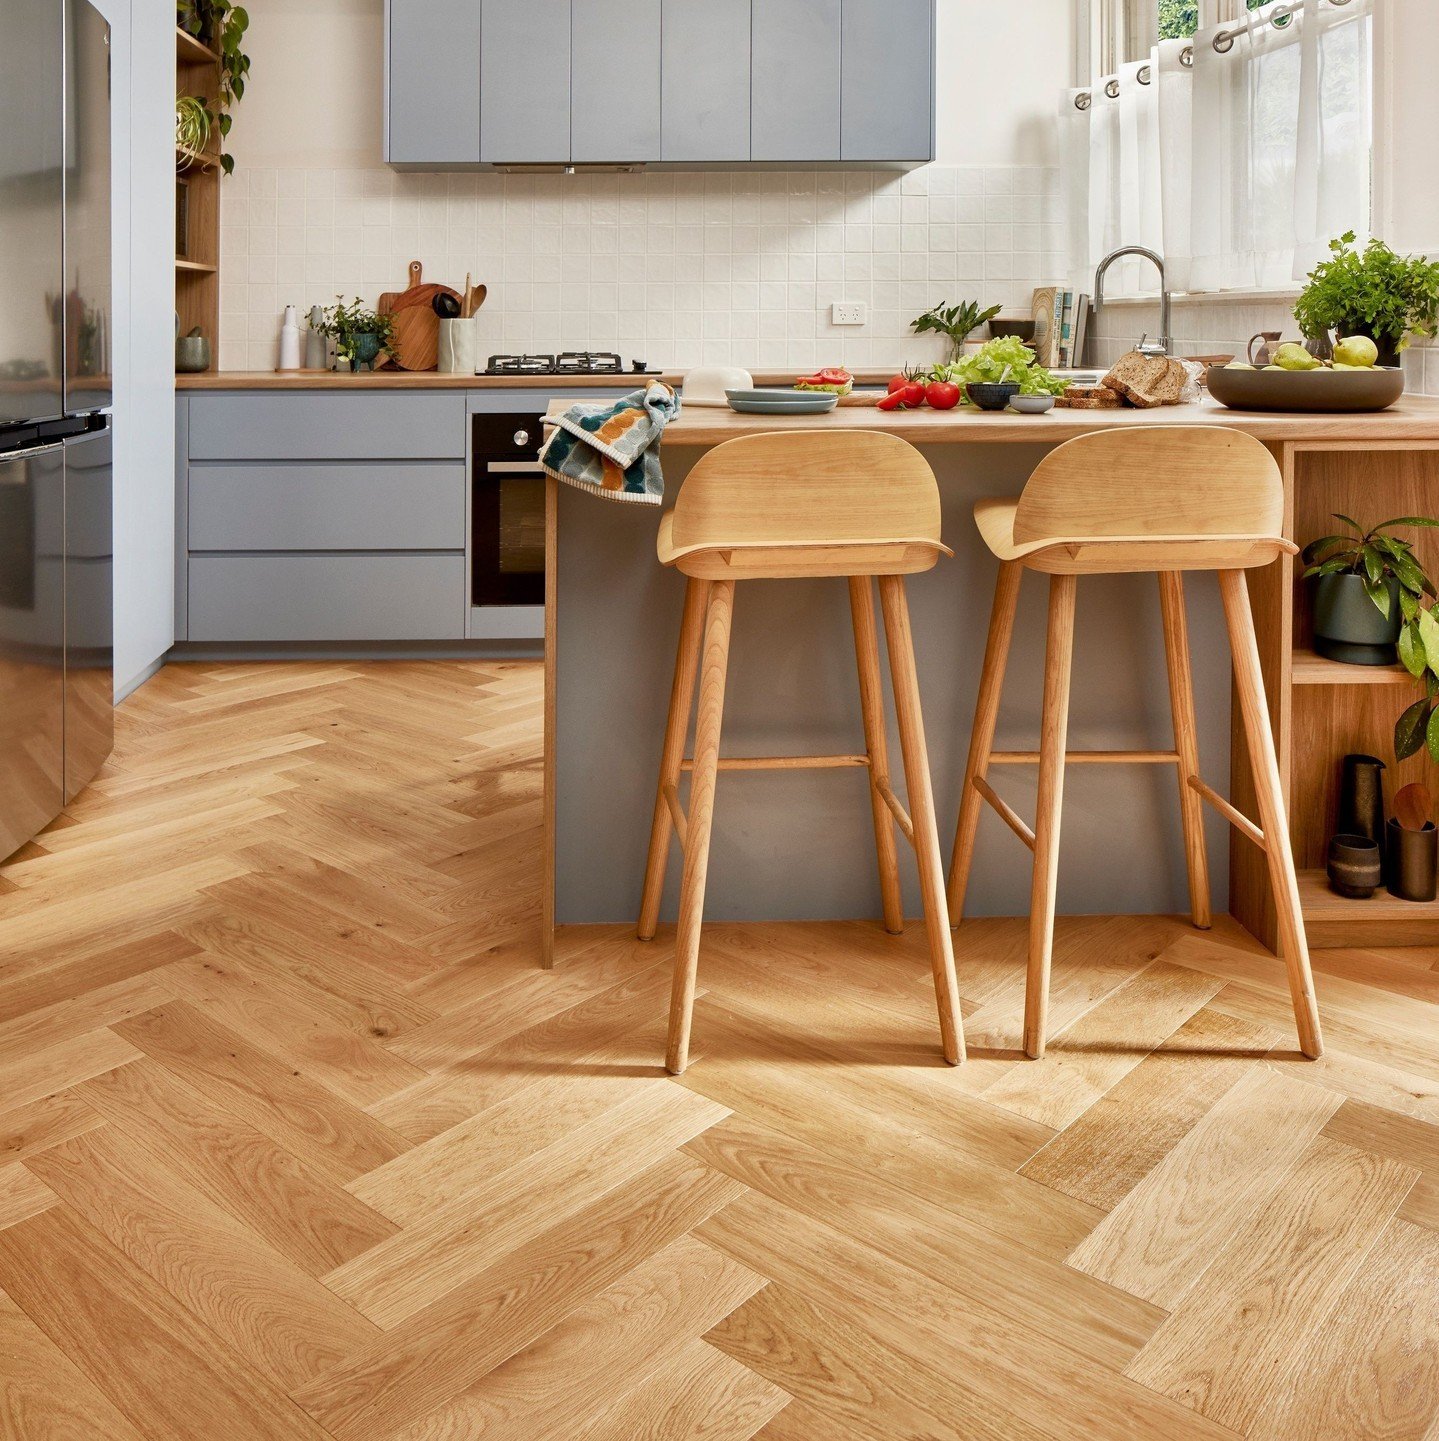 Why choose Godfrey Hirst wood flooring? ⁠
⁠
1️⃣ Quality Engineered Timber: Our wood flooring boasts a hardwood top layer for unmatched strength and stability. Engineered timber resists warping and shifting, ensuring your floors stay beautiful for yea